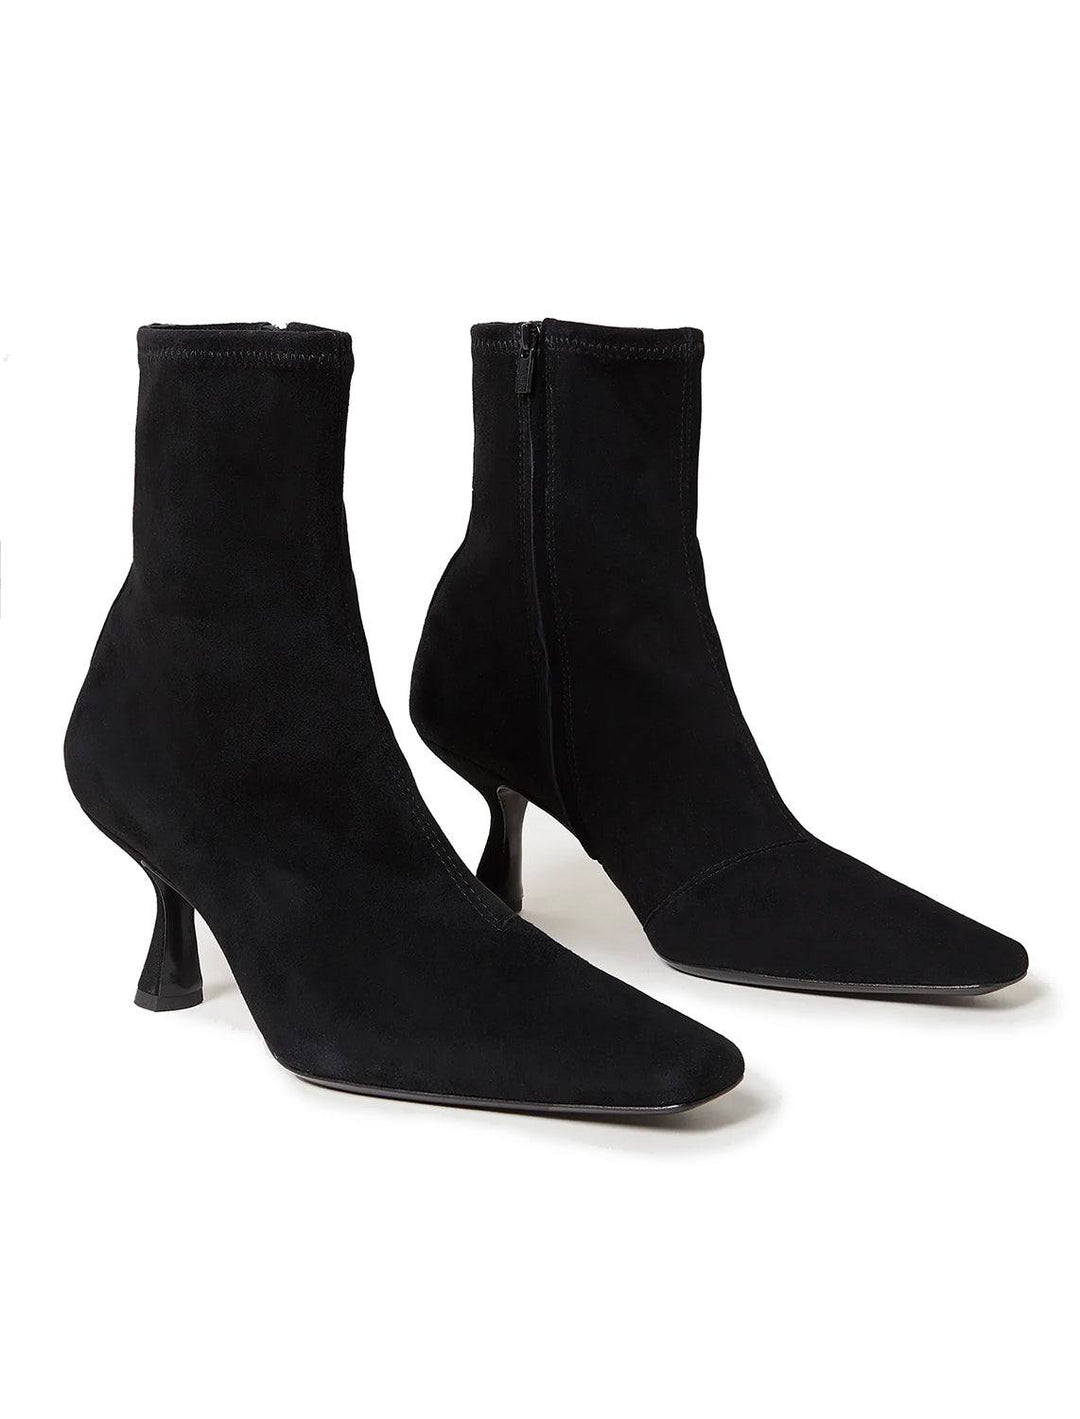 Front angle view of the pair of Loeffler Randall's thandy boot in black.